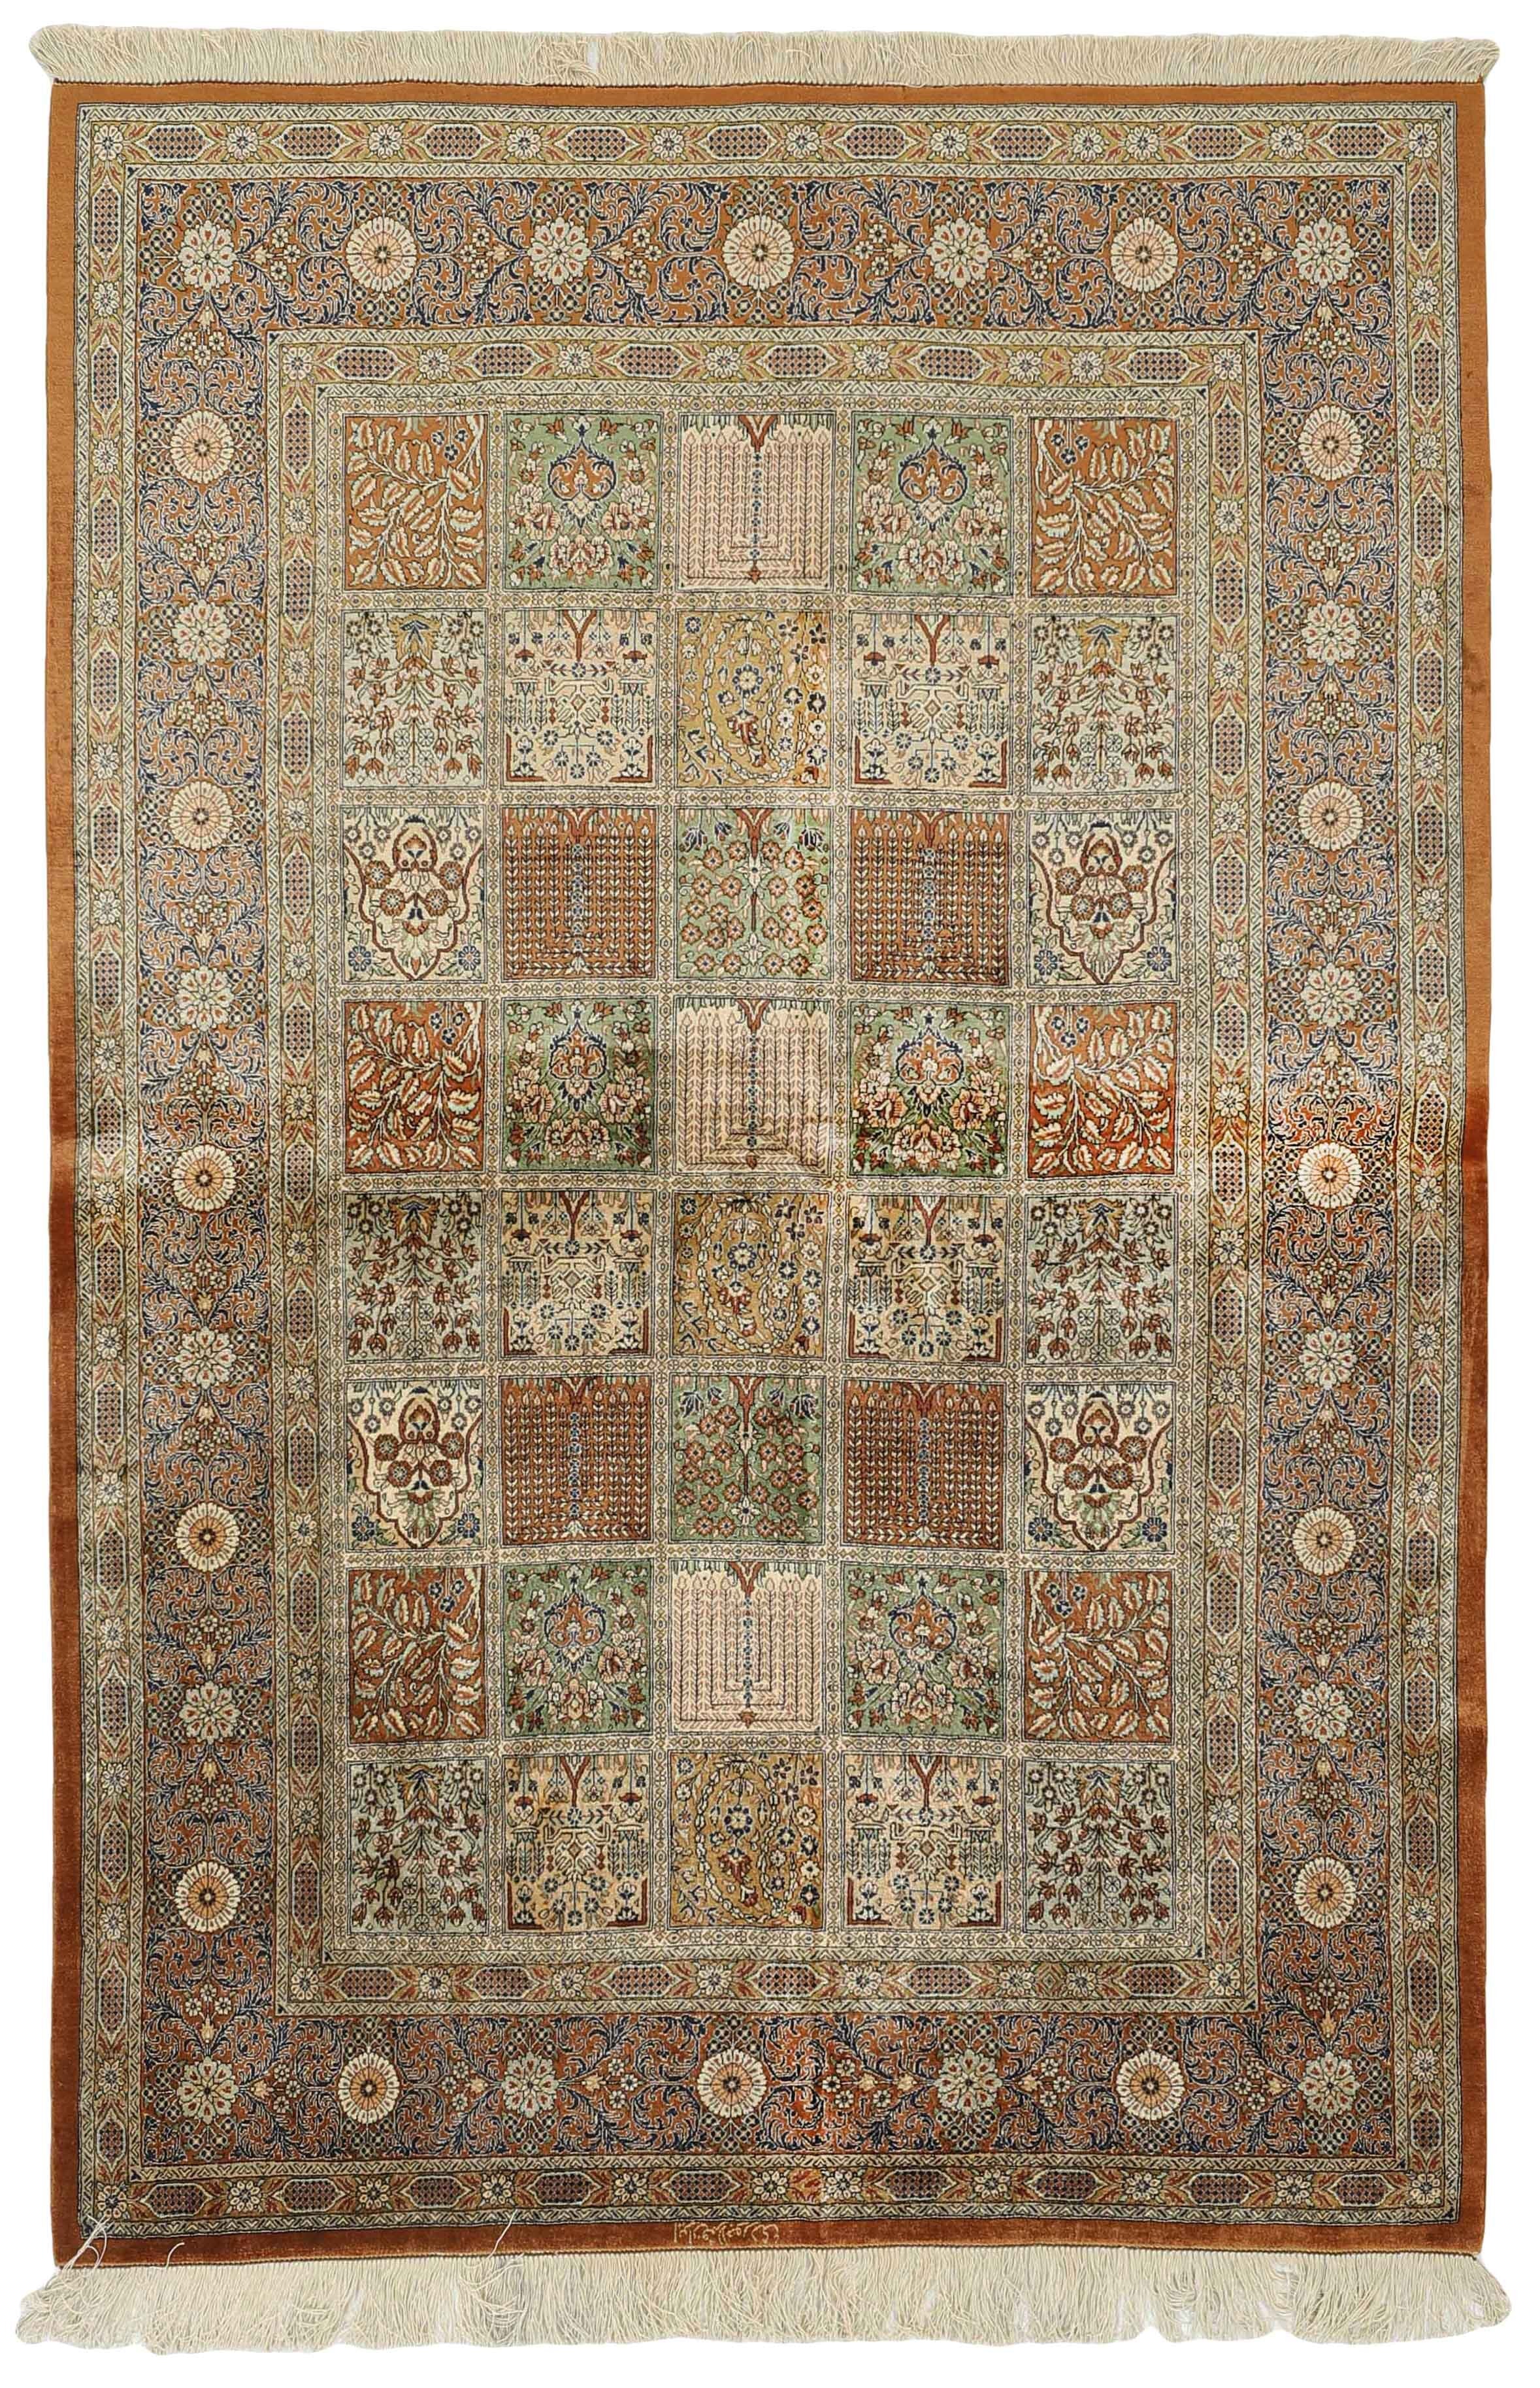 Authentic persian rug with a traditional floral design in red, pink, yellow, blue, green, beige, brown and black